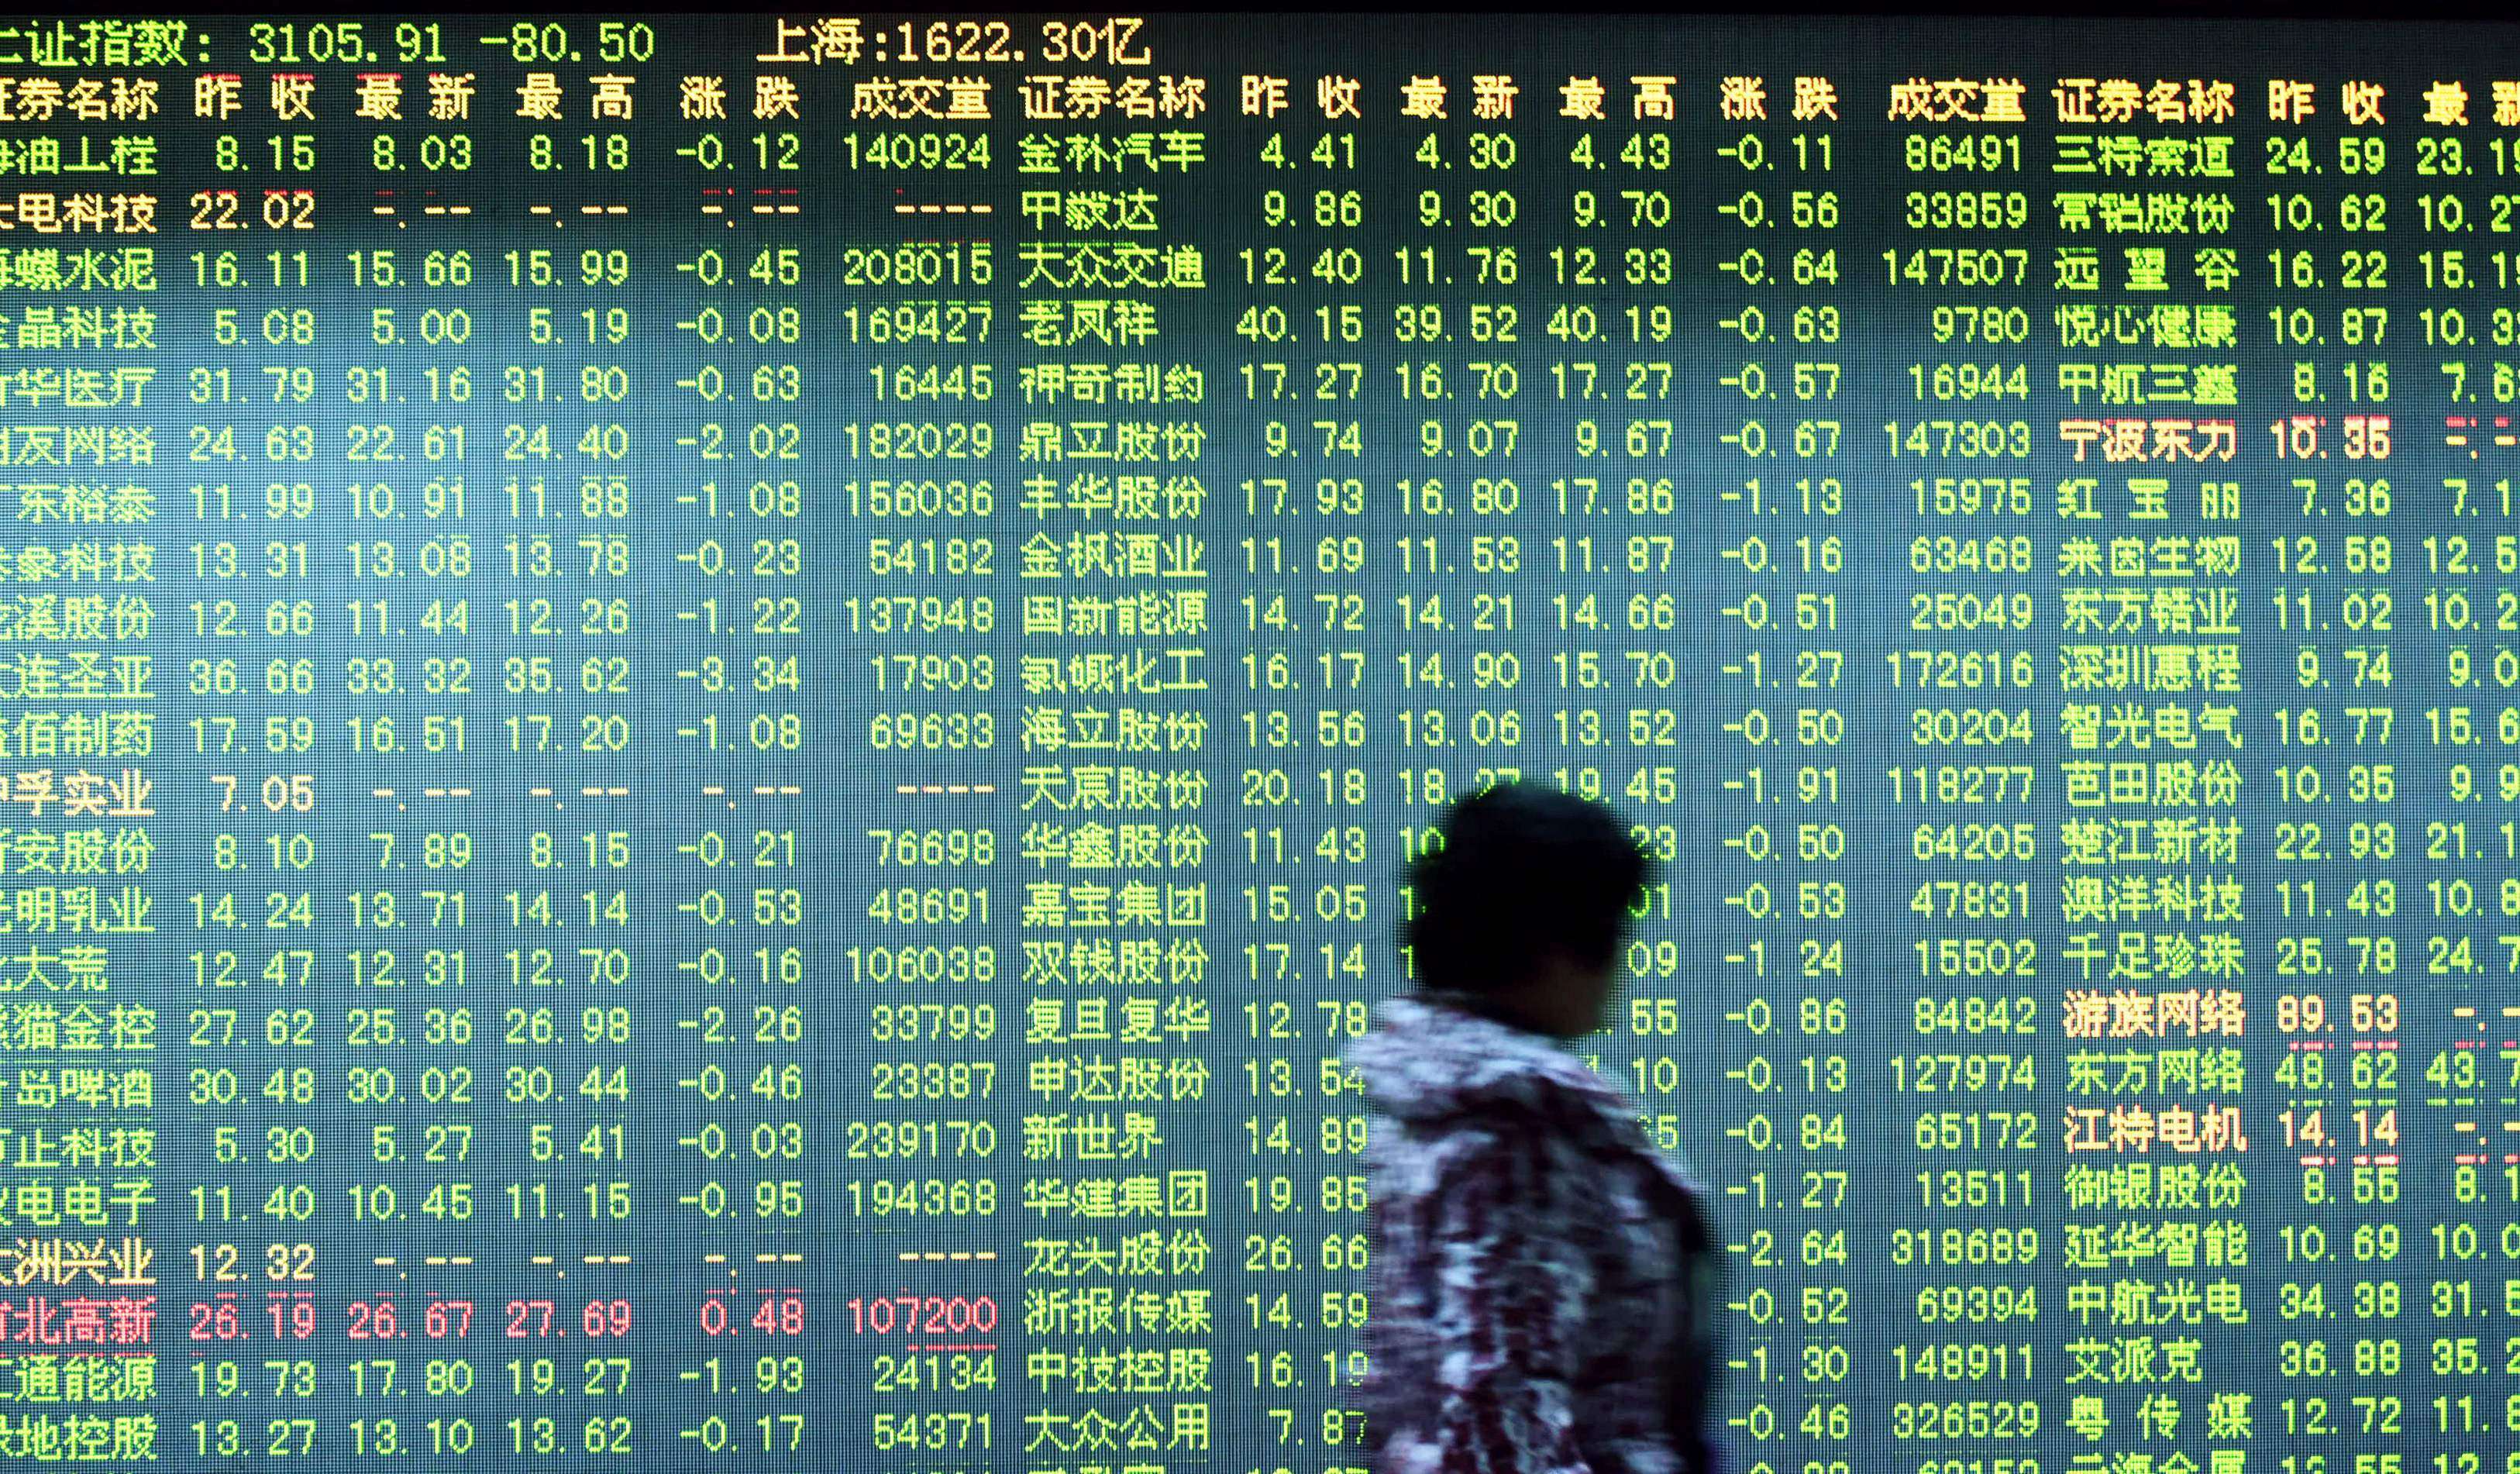 An investor walks past a screen showing stock market movements in Hangzhou in eastern China’s Zhejiang province. Photo: AFP